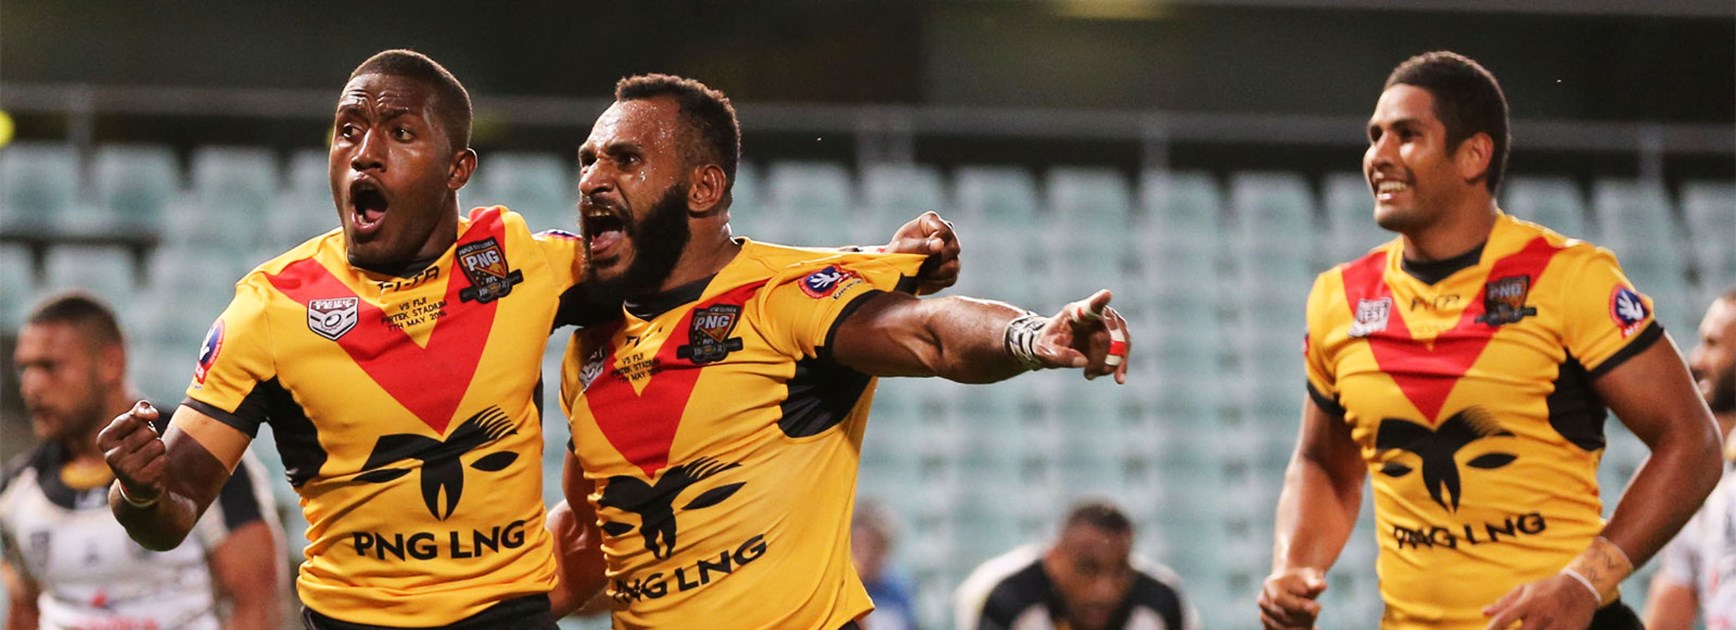 Papua New Guinea celebrate a try during their win over Fiji on Saturday night.